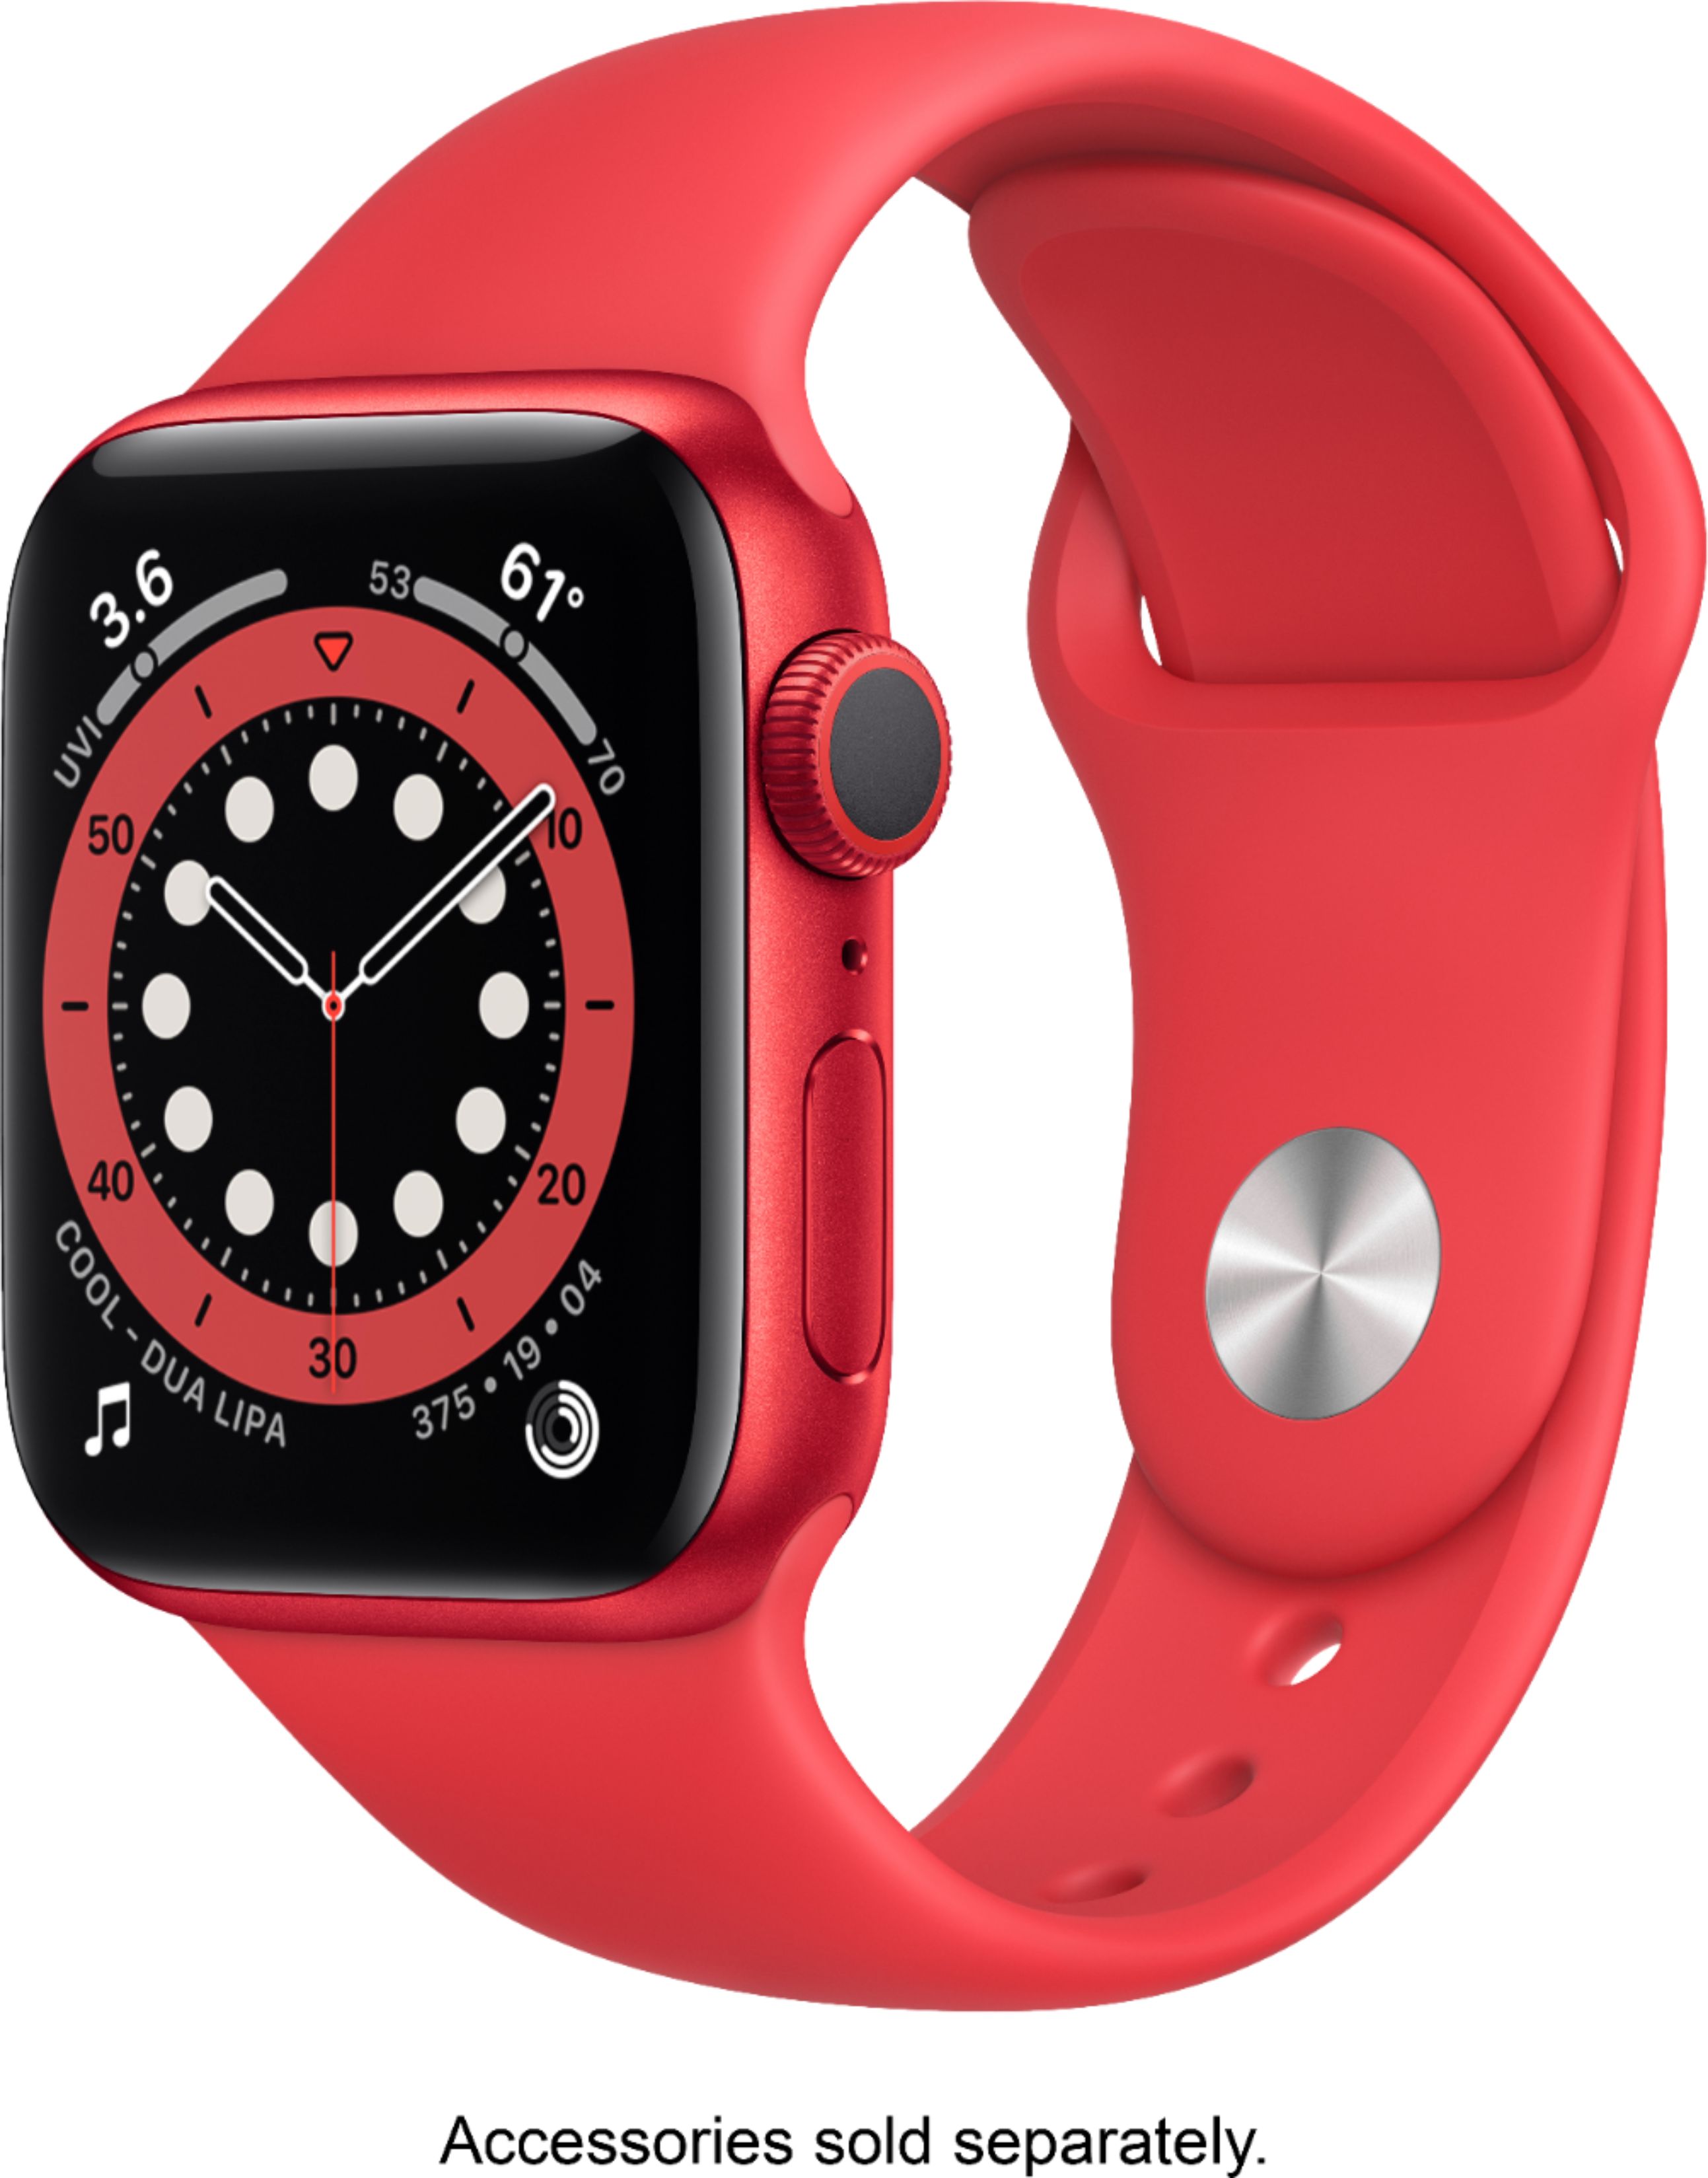 Apple Watch Series 6 (PRODUCT)RED - 40mm - GPS for $279.00 @ BestBuy